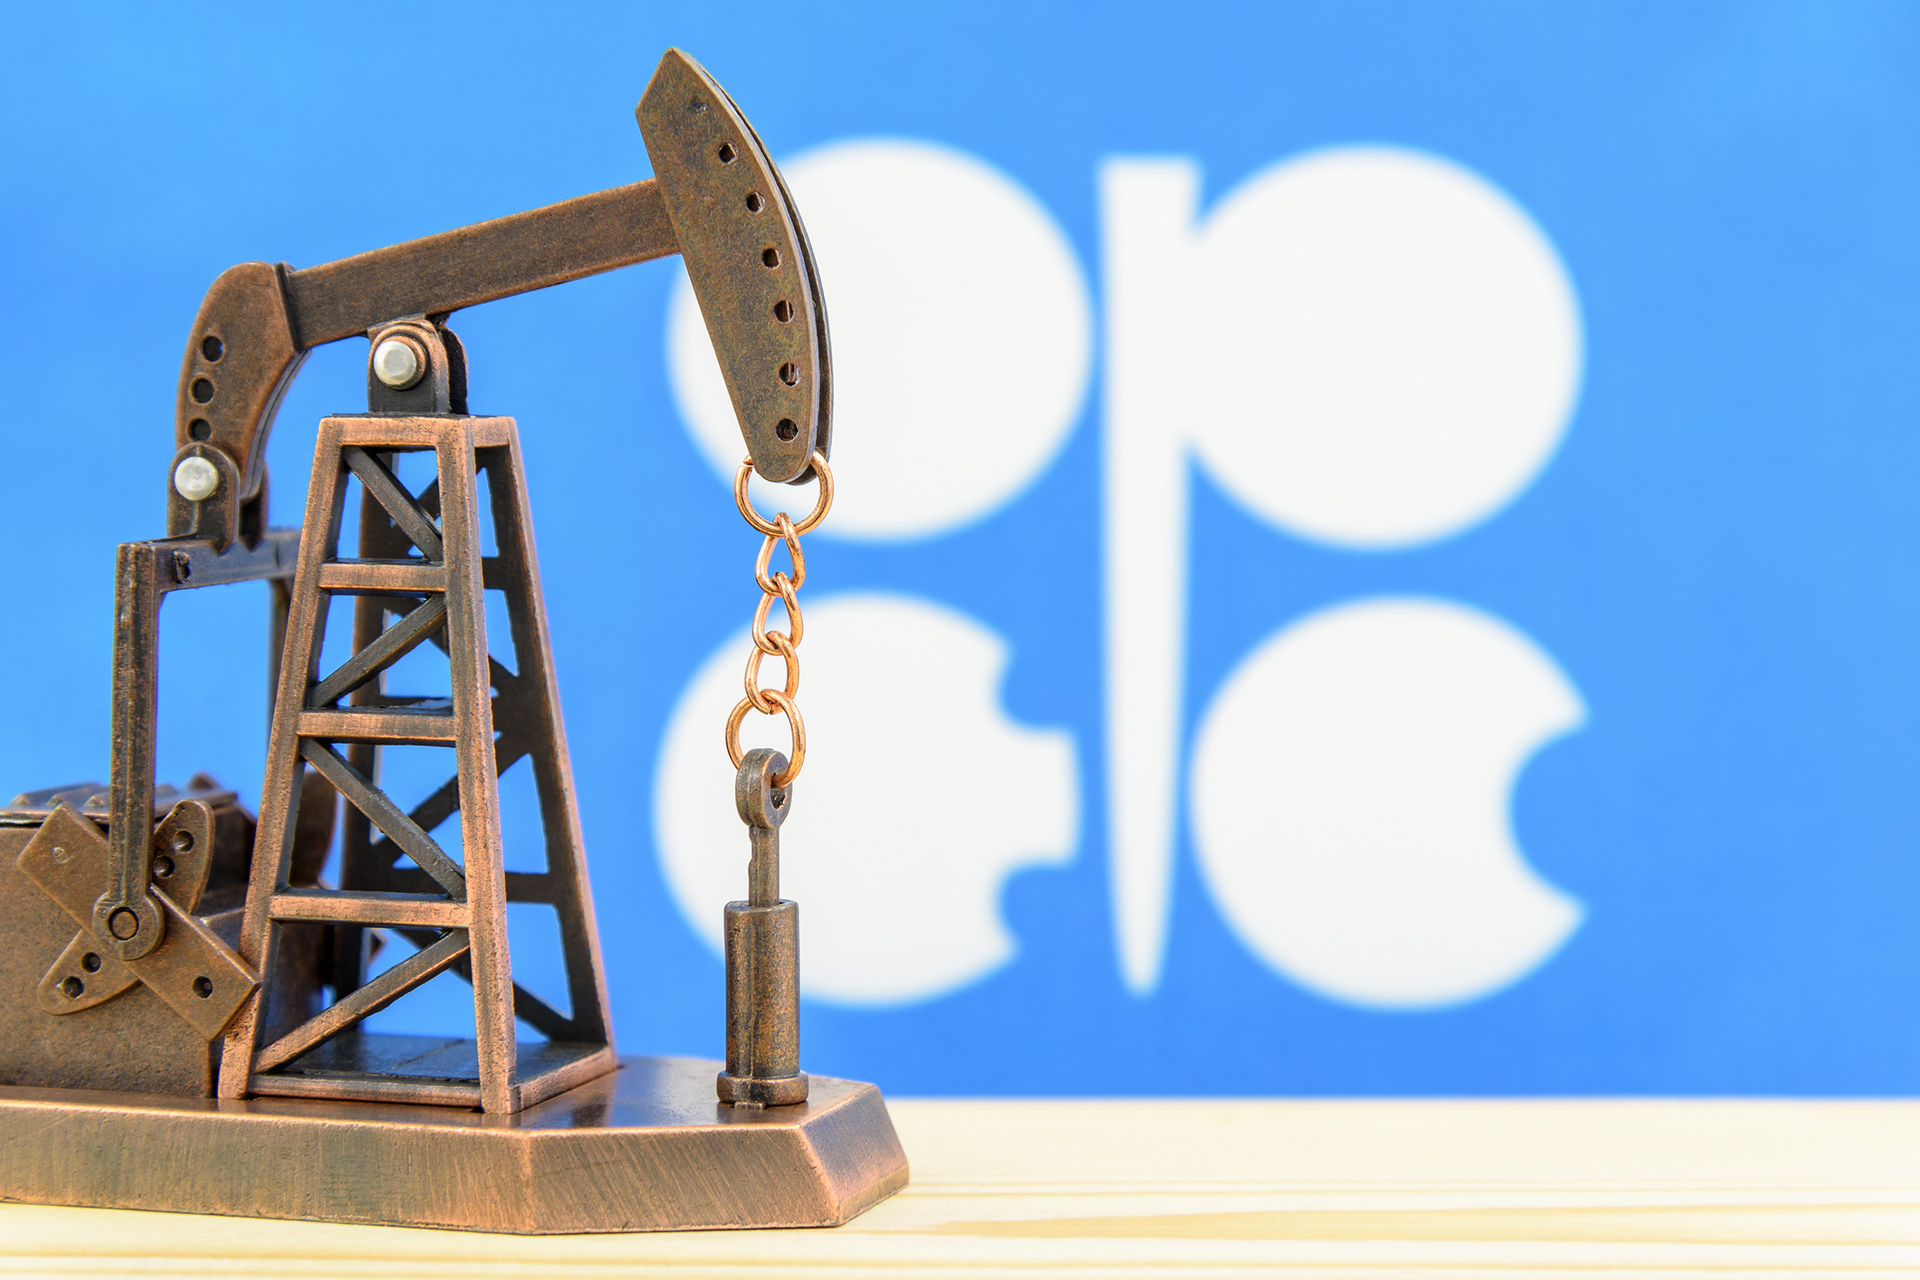 Reuters: OPEC Plus talks are difficult and there are possibilities of extending the production policy